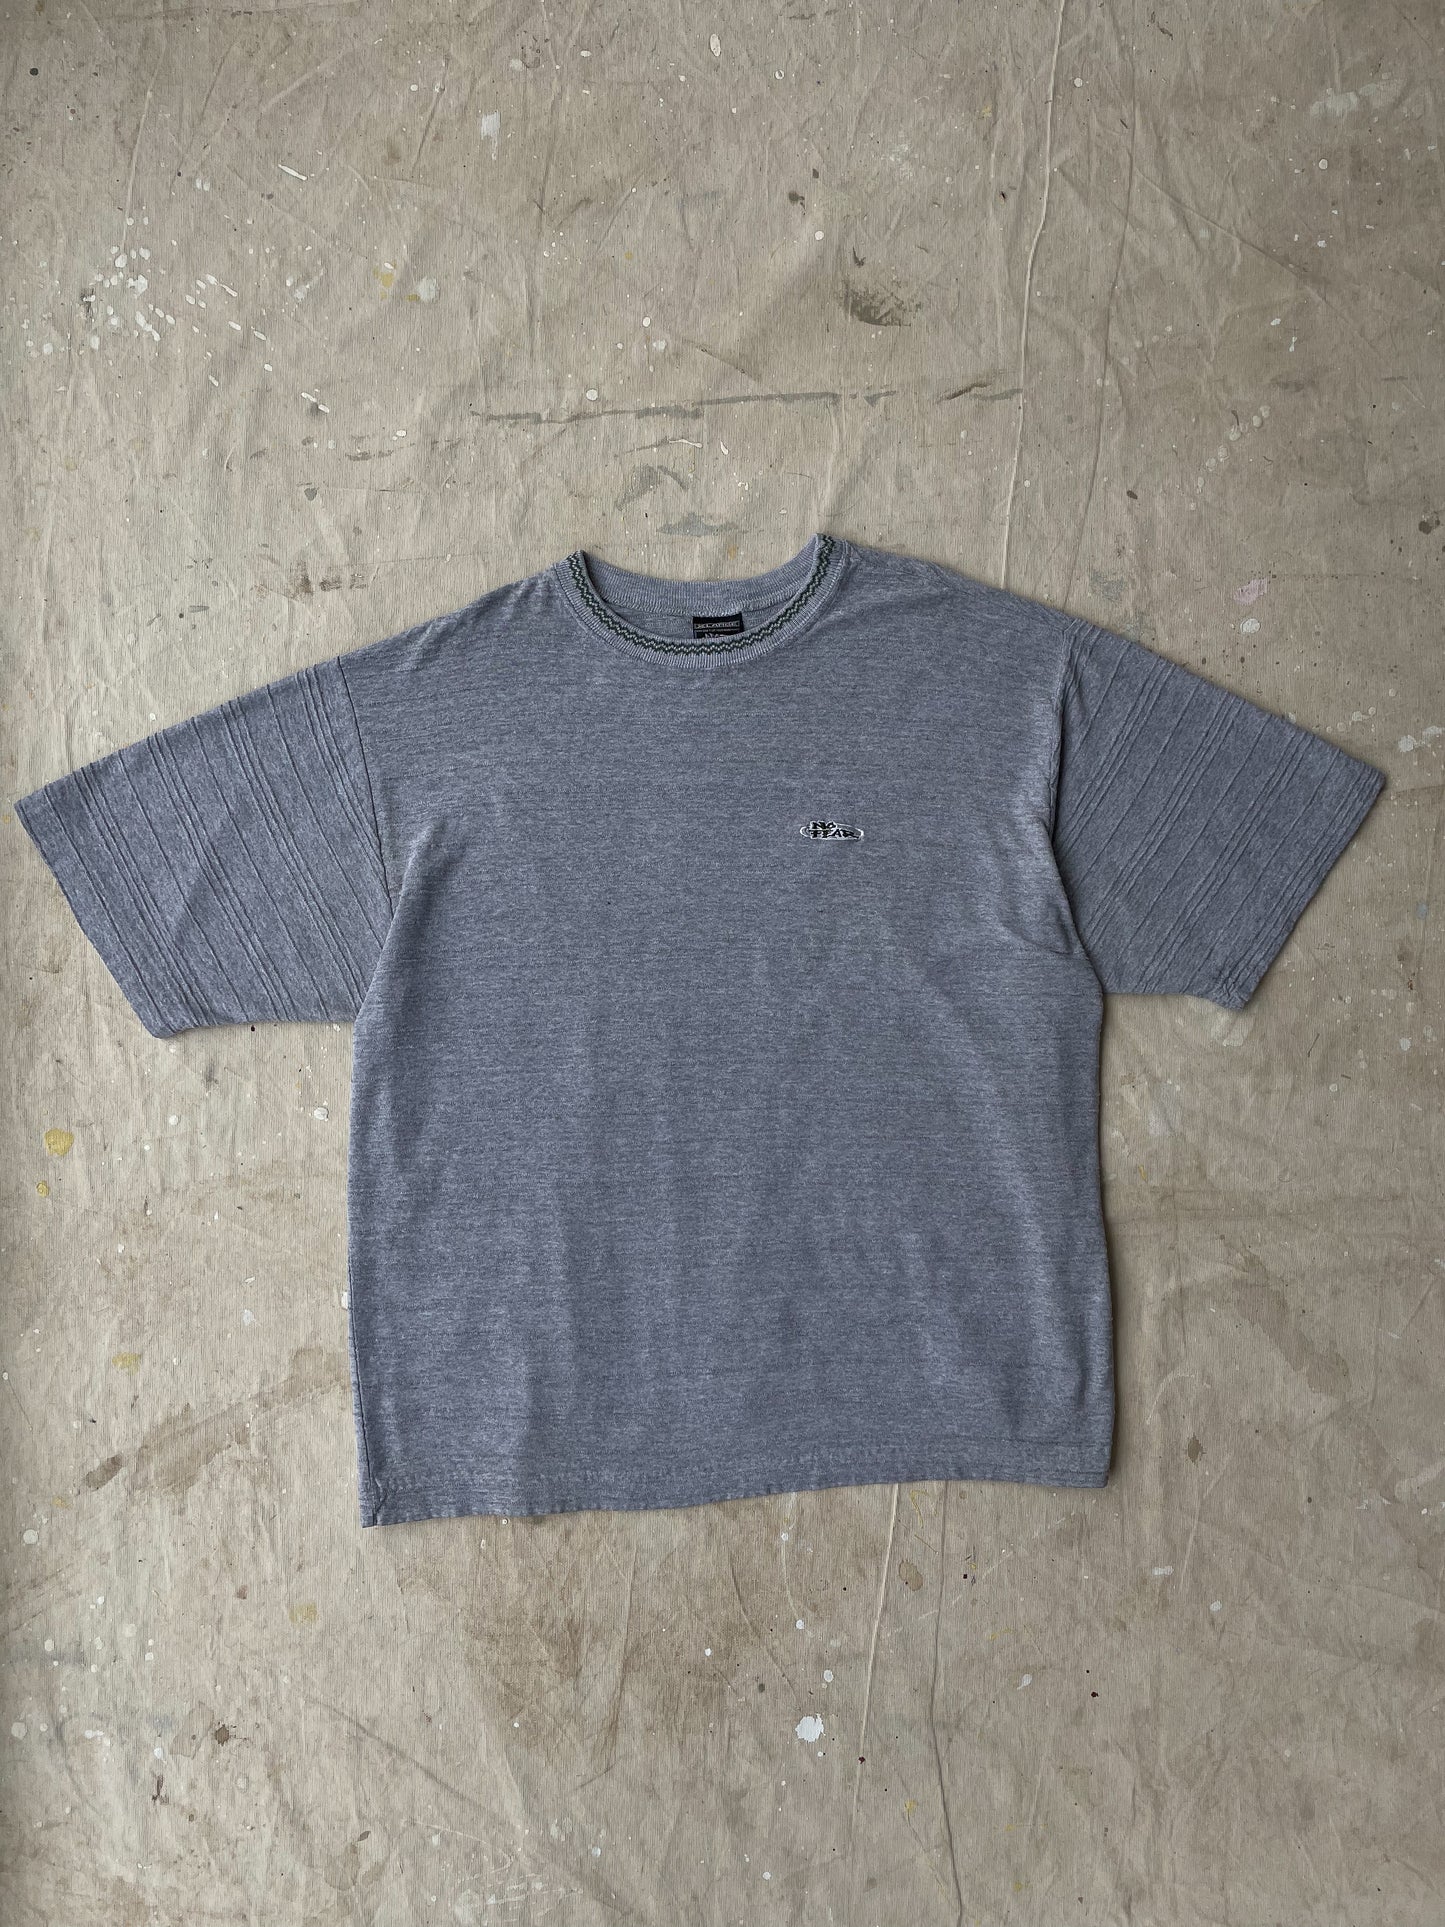 NO FEAR EMBROIDERED STRIPED T-SHIRT—MARL GREY [XL]